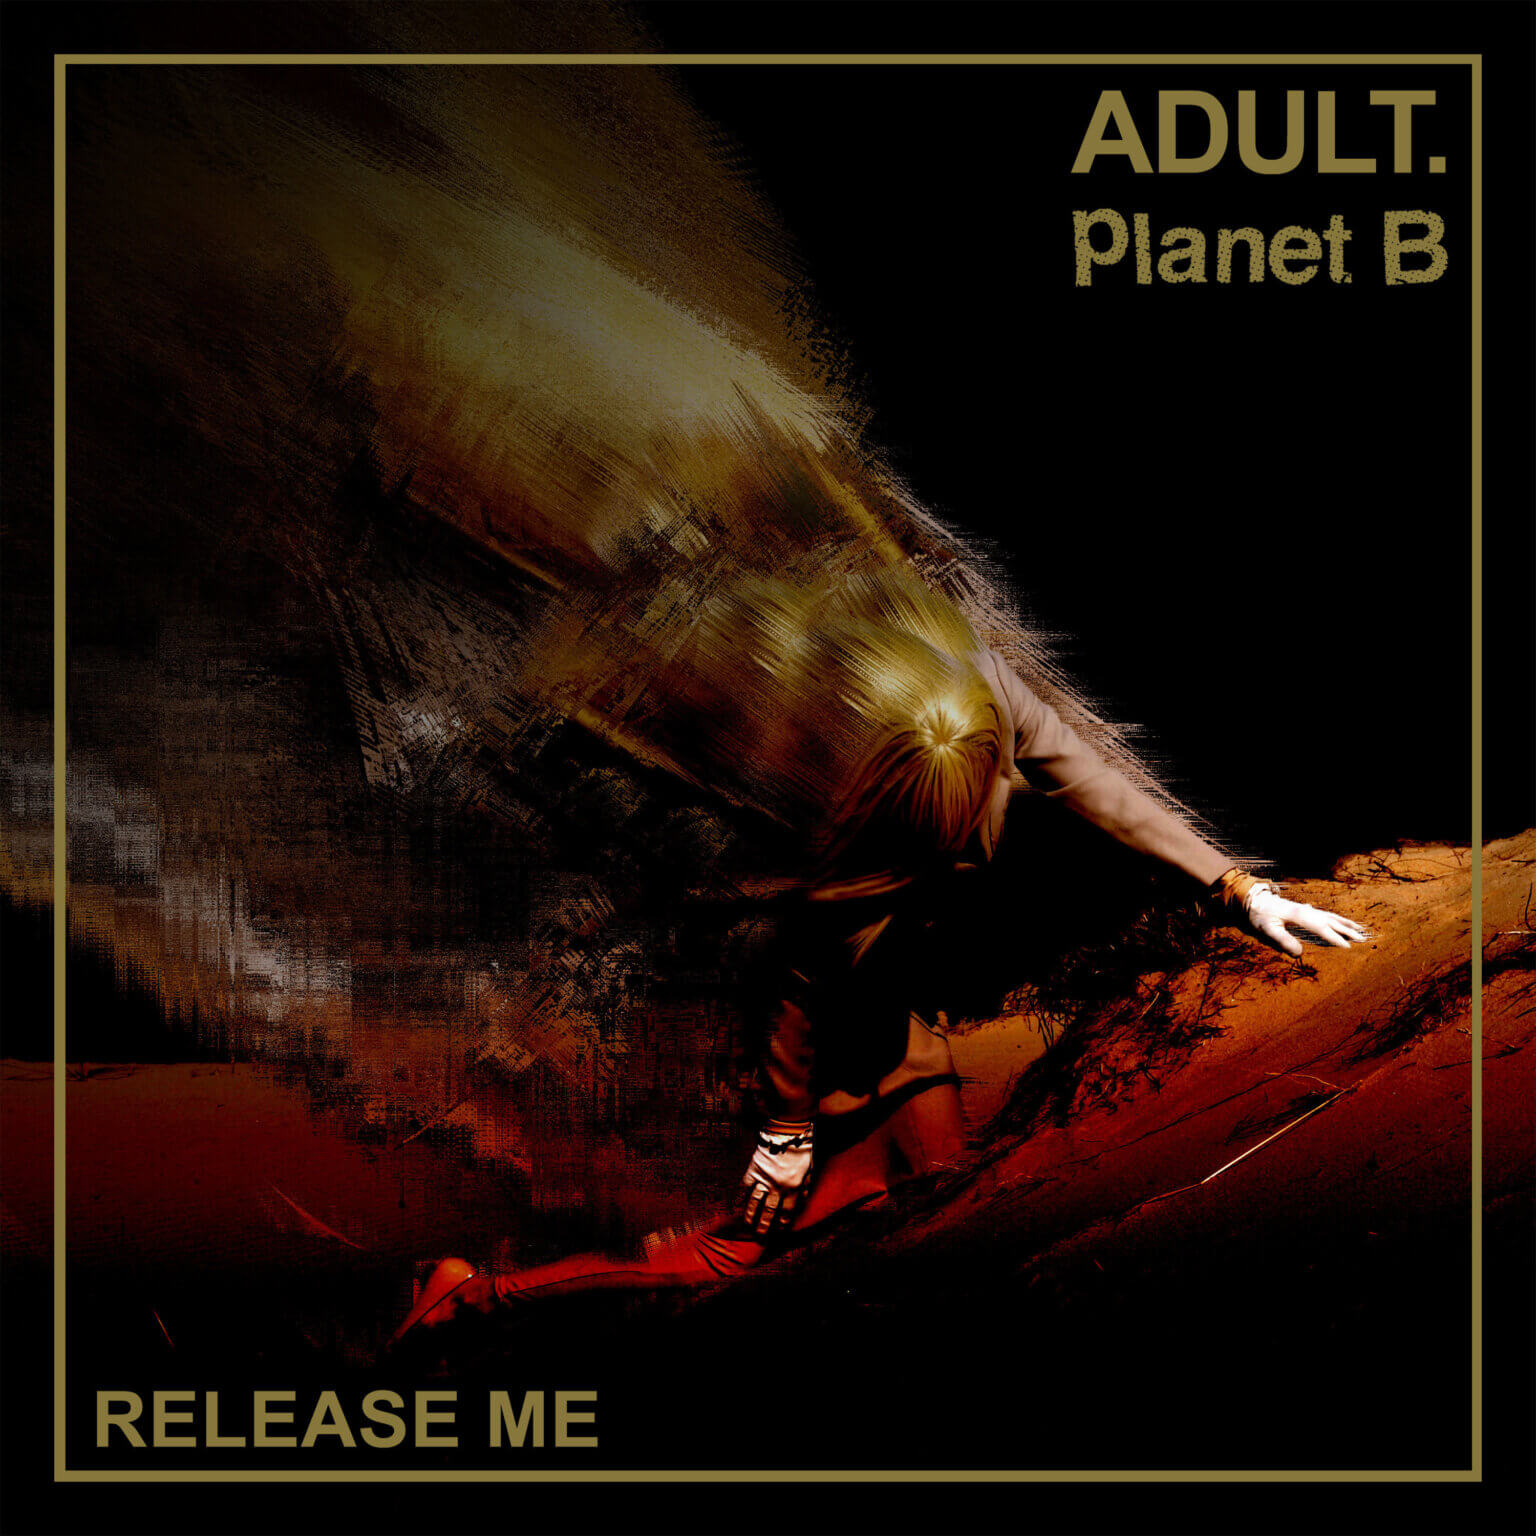 "Release Me" by ADULT. & Planet B is Northern Transmissions Song of the Day